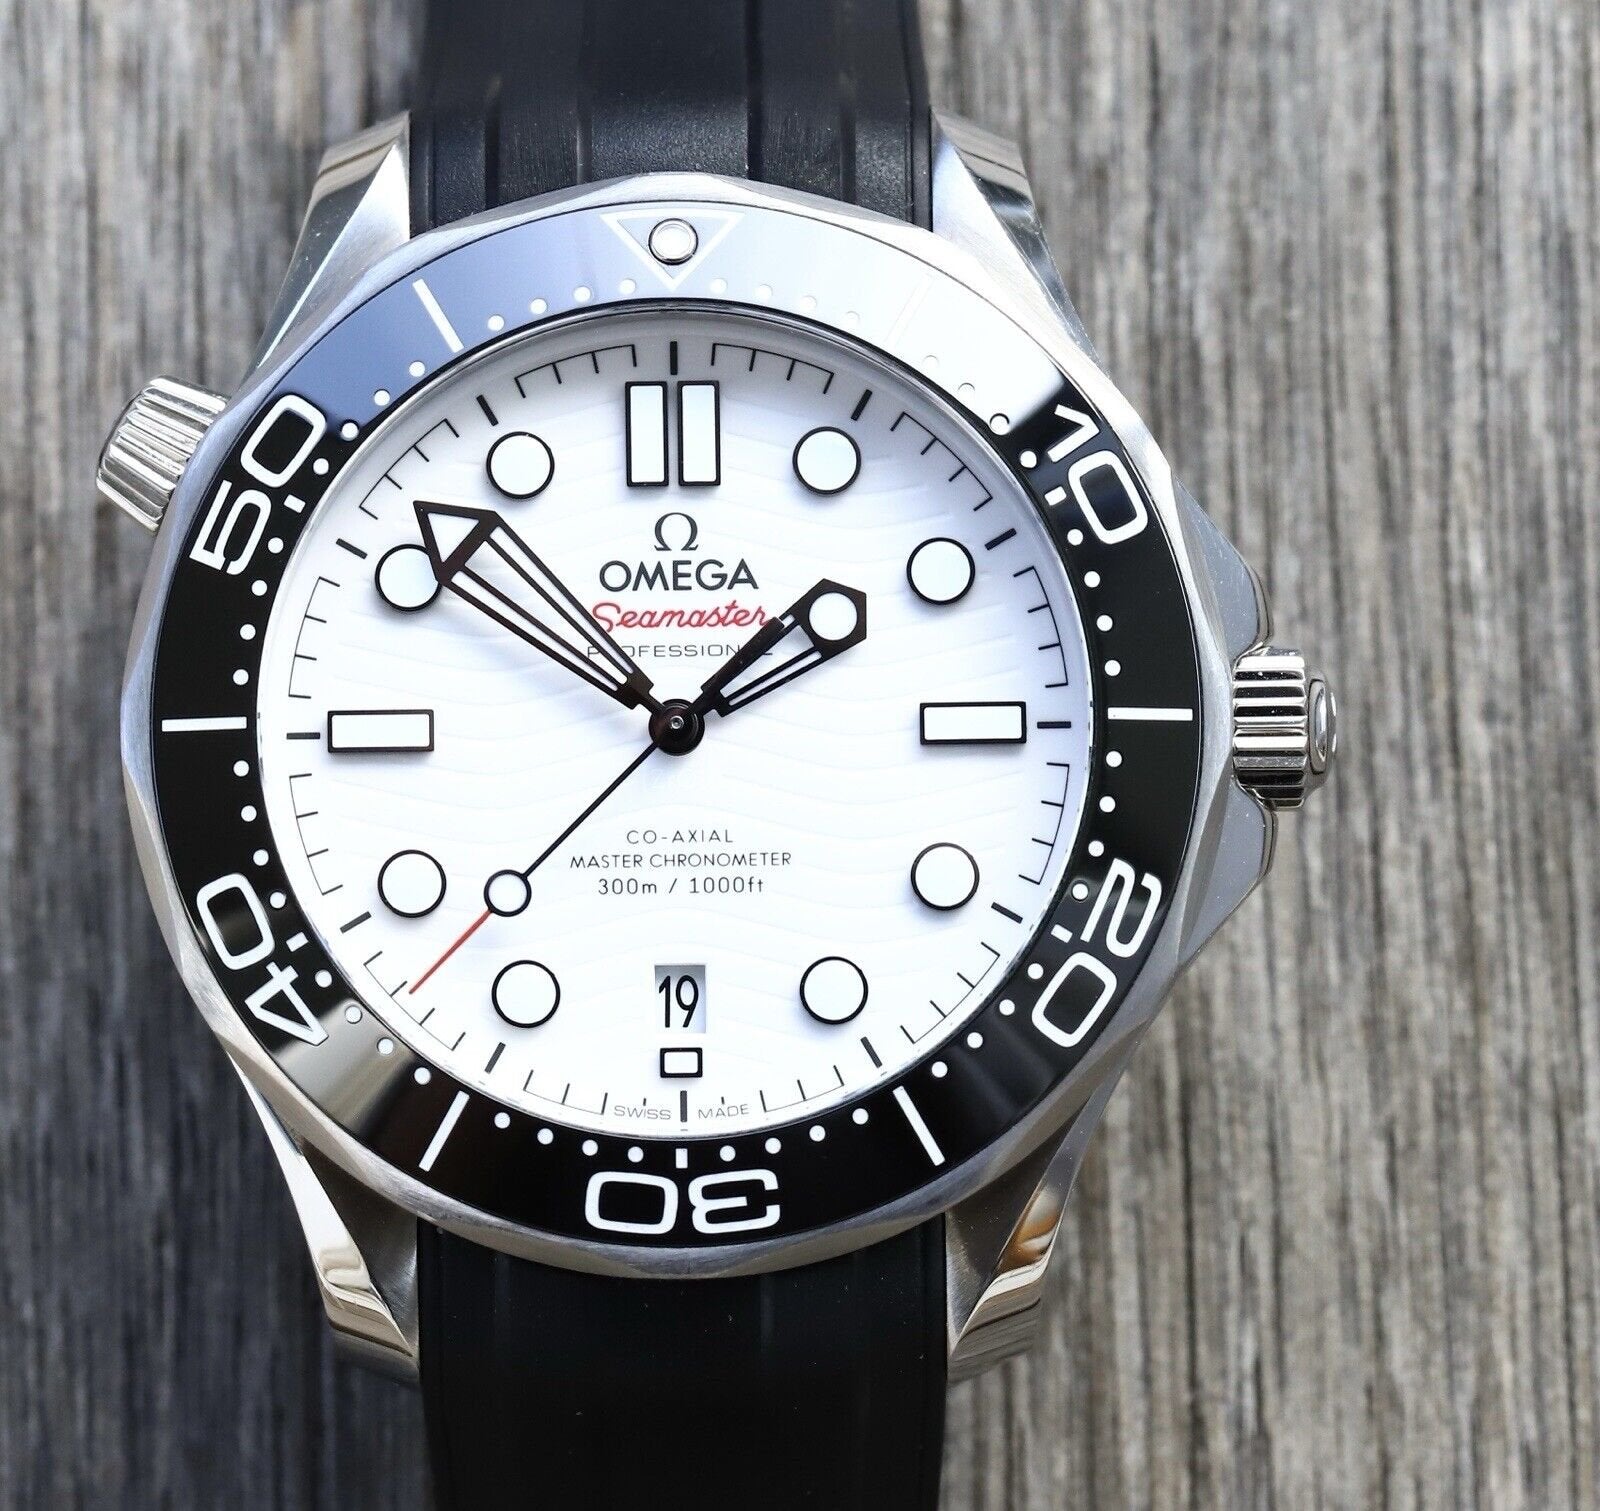 Omega_Seamaster_Diver_300M_Co-Axial_Great_White_42mm_210.32.42.20.04.001_Watch_Vault_01.jpg